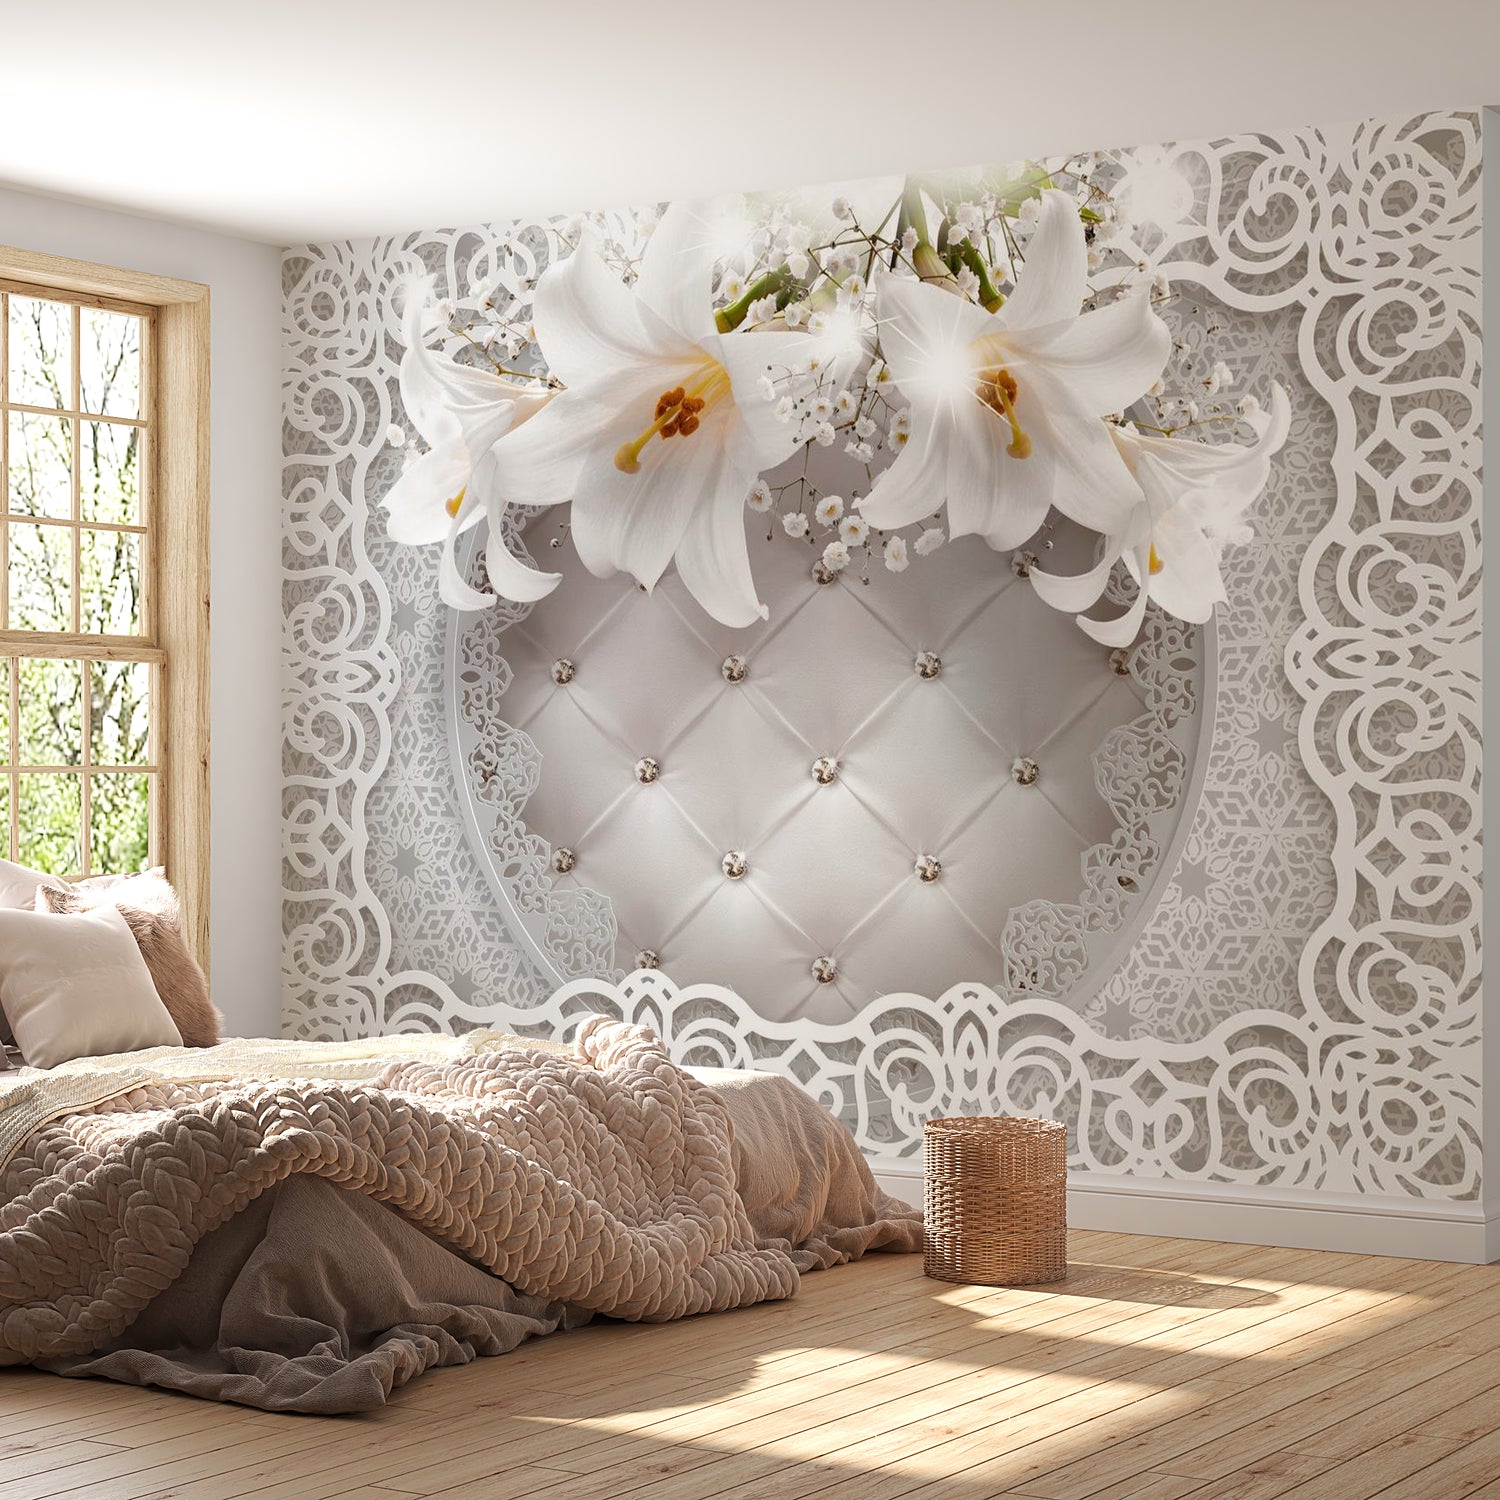 Peel & Stick Floral Wall Mural - Lilies And Quilted Background - Removable Wall Decals